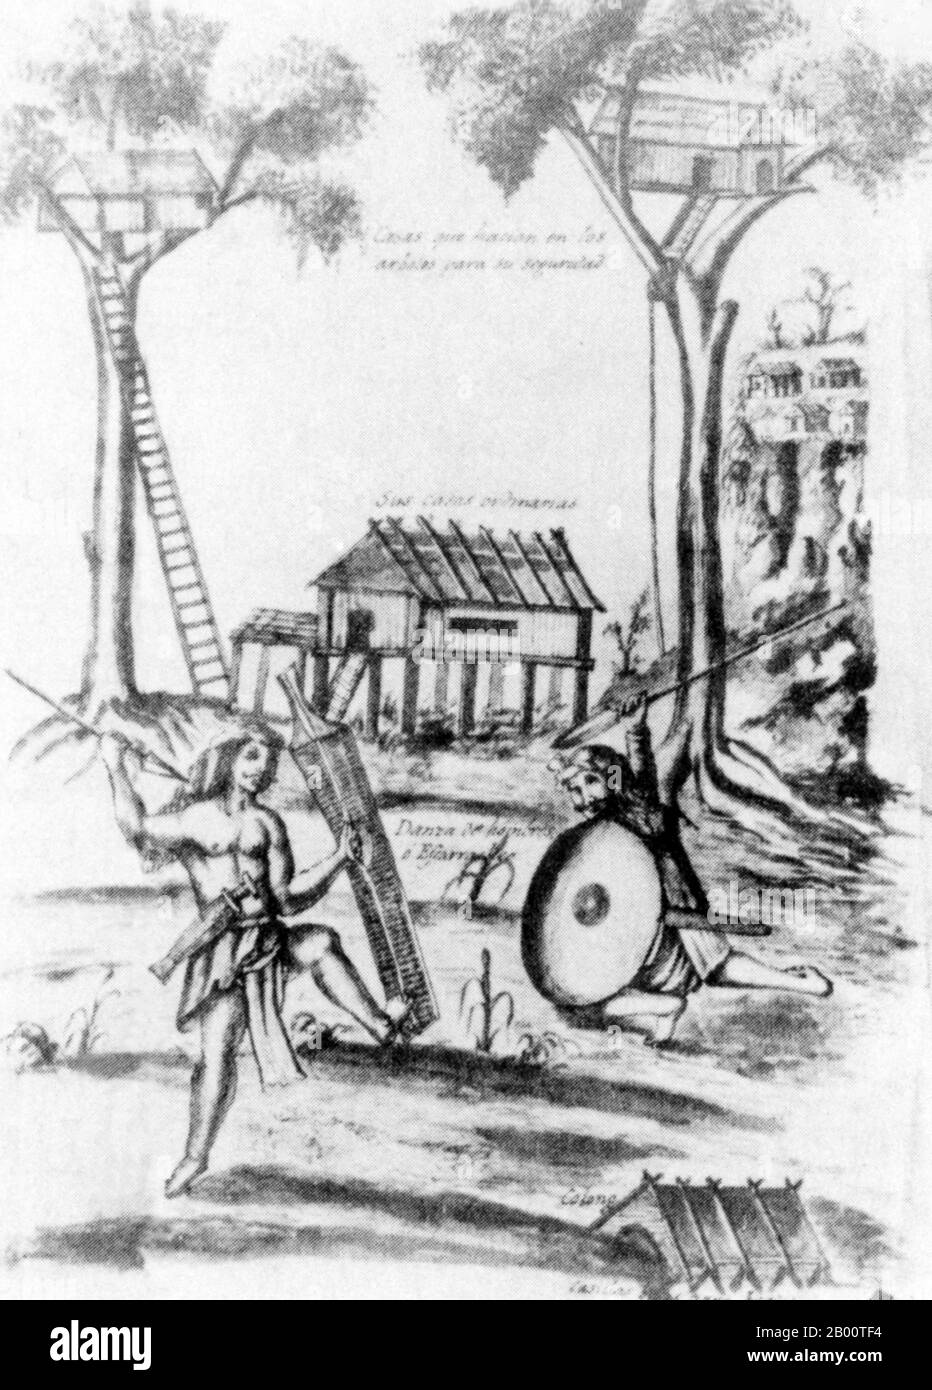 Philippines: Two treehouses, probably used as granaries, stand either side of a rustic Visayan house. Illustration by Francisco Ignacio Alcina (1610-1674), 17th century.  The name ‘Viasayan’ refers to any of several ethnic groups, including Austronesian and Negroid peoples, that inhabit the regions of the Visayas and some parts of Mindanao in the Philippines. Stock Photo